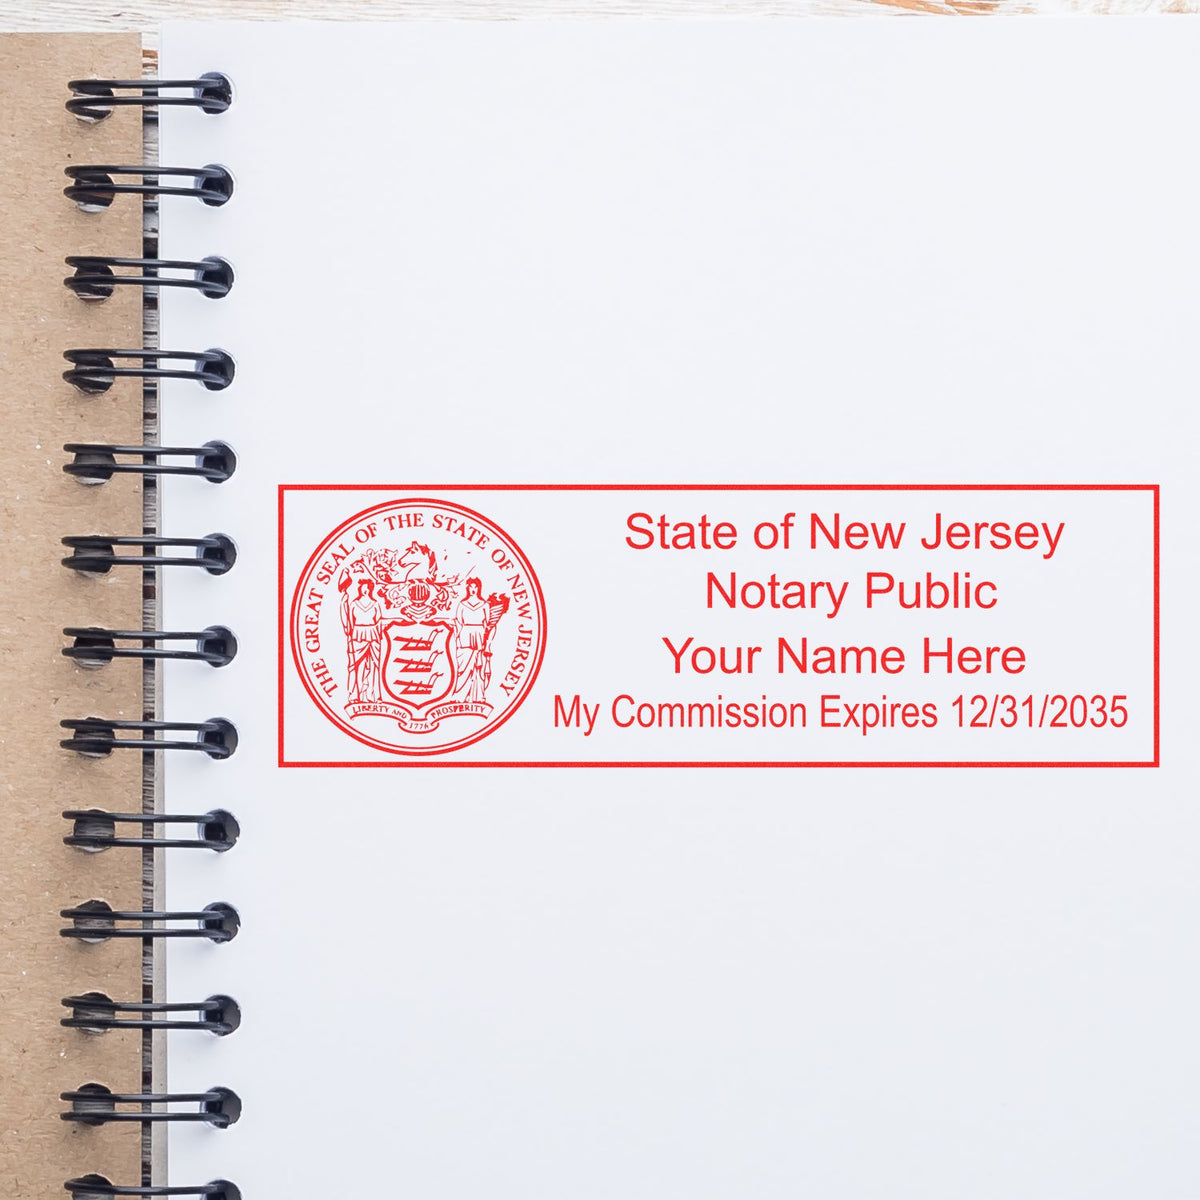 A stamped impression of the PSI New Jersey Notary Stamp in this stylish lifestyle photo, setting the tone for a unique and personalized product.